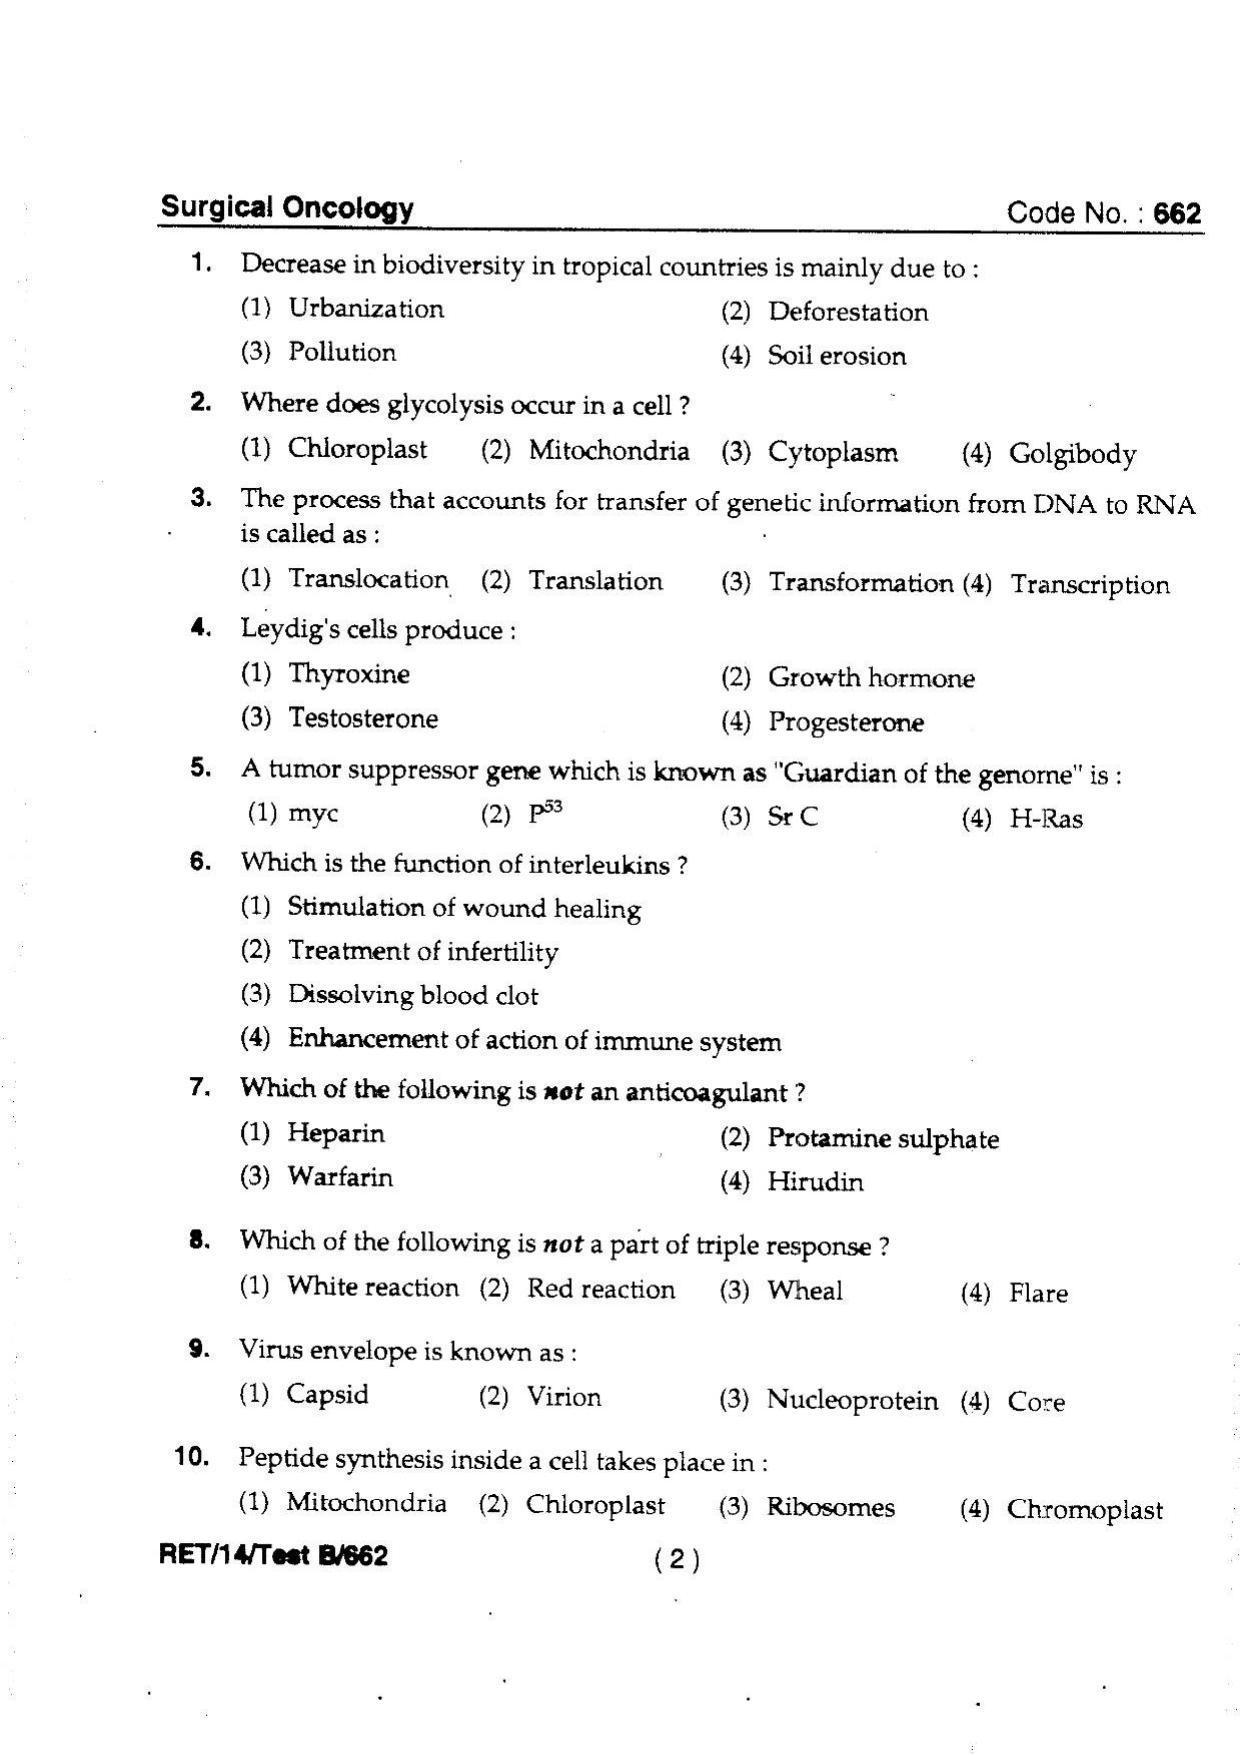 BHU RET Surgical Oncology 2014 Question Paper - Page 4